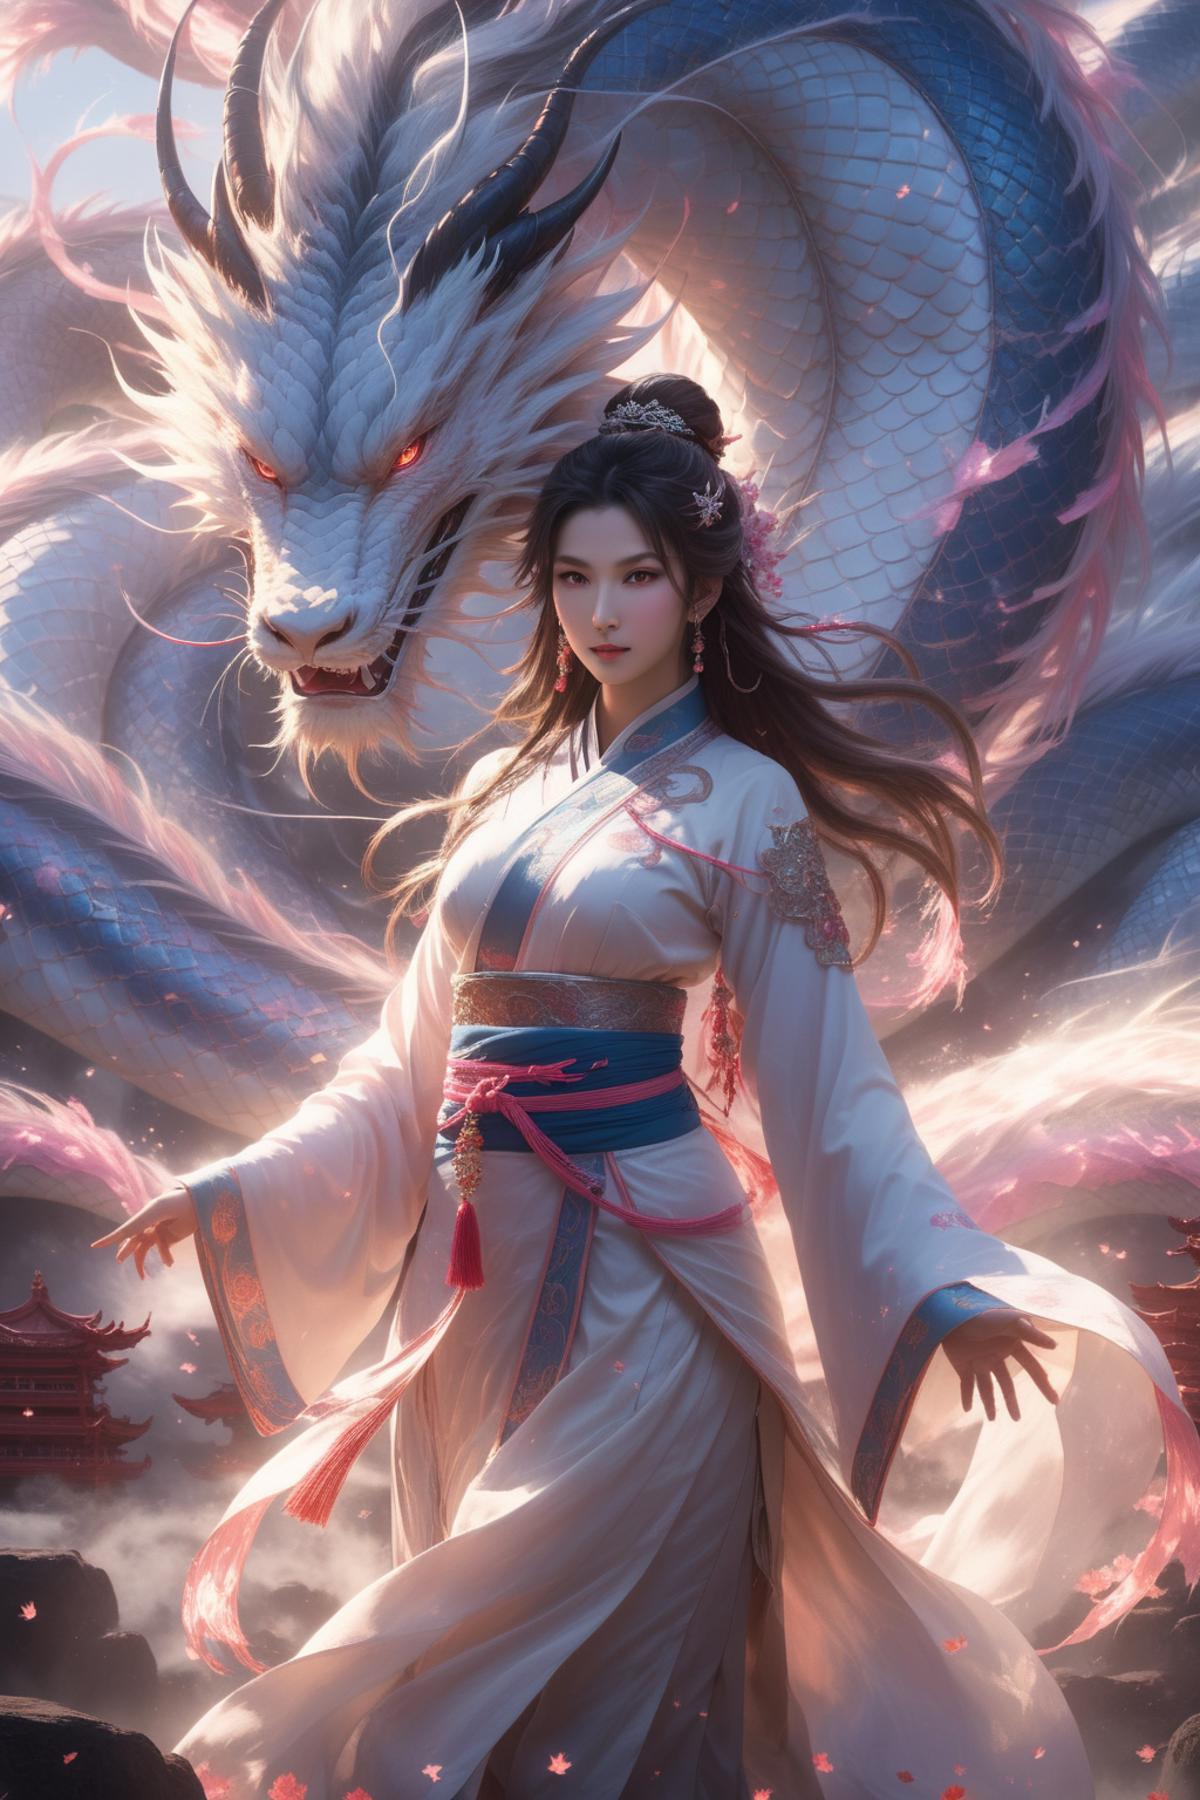 A woman in a white dress with a blue belt and a red ribbon standing in front of a dragon.